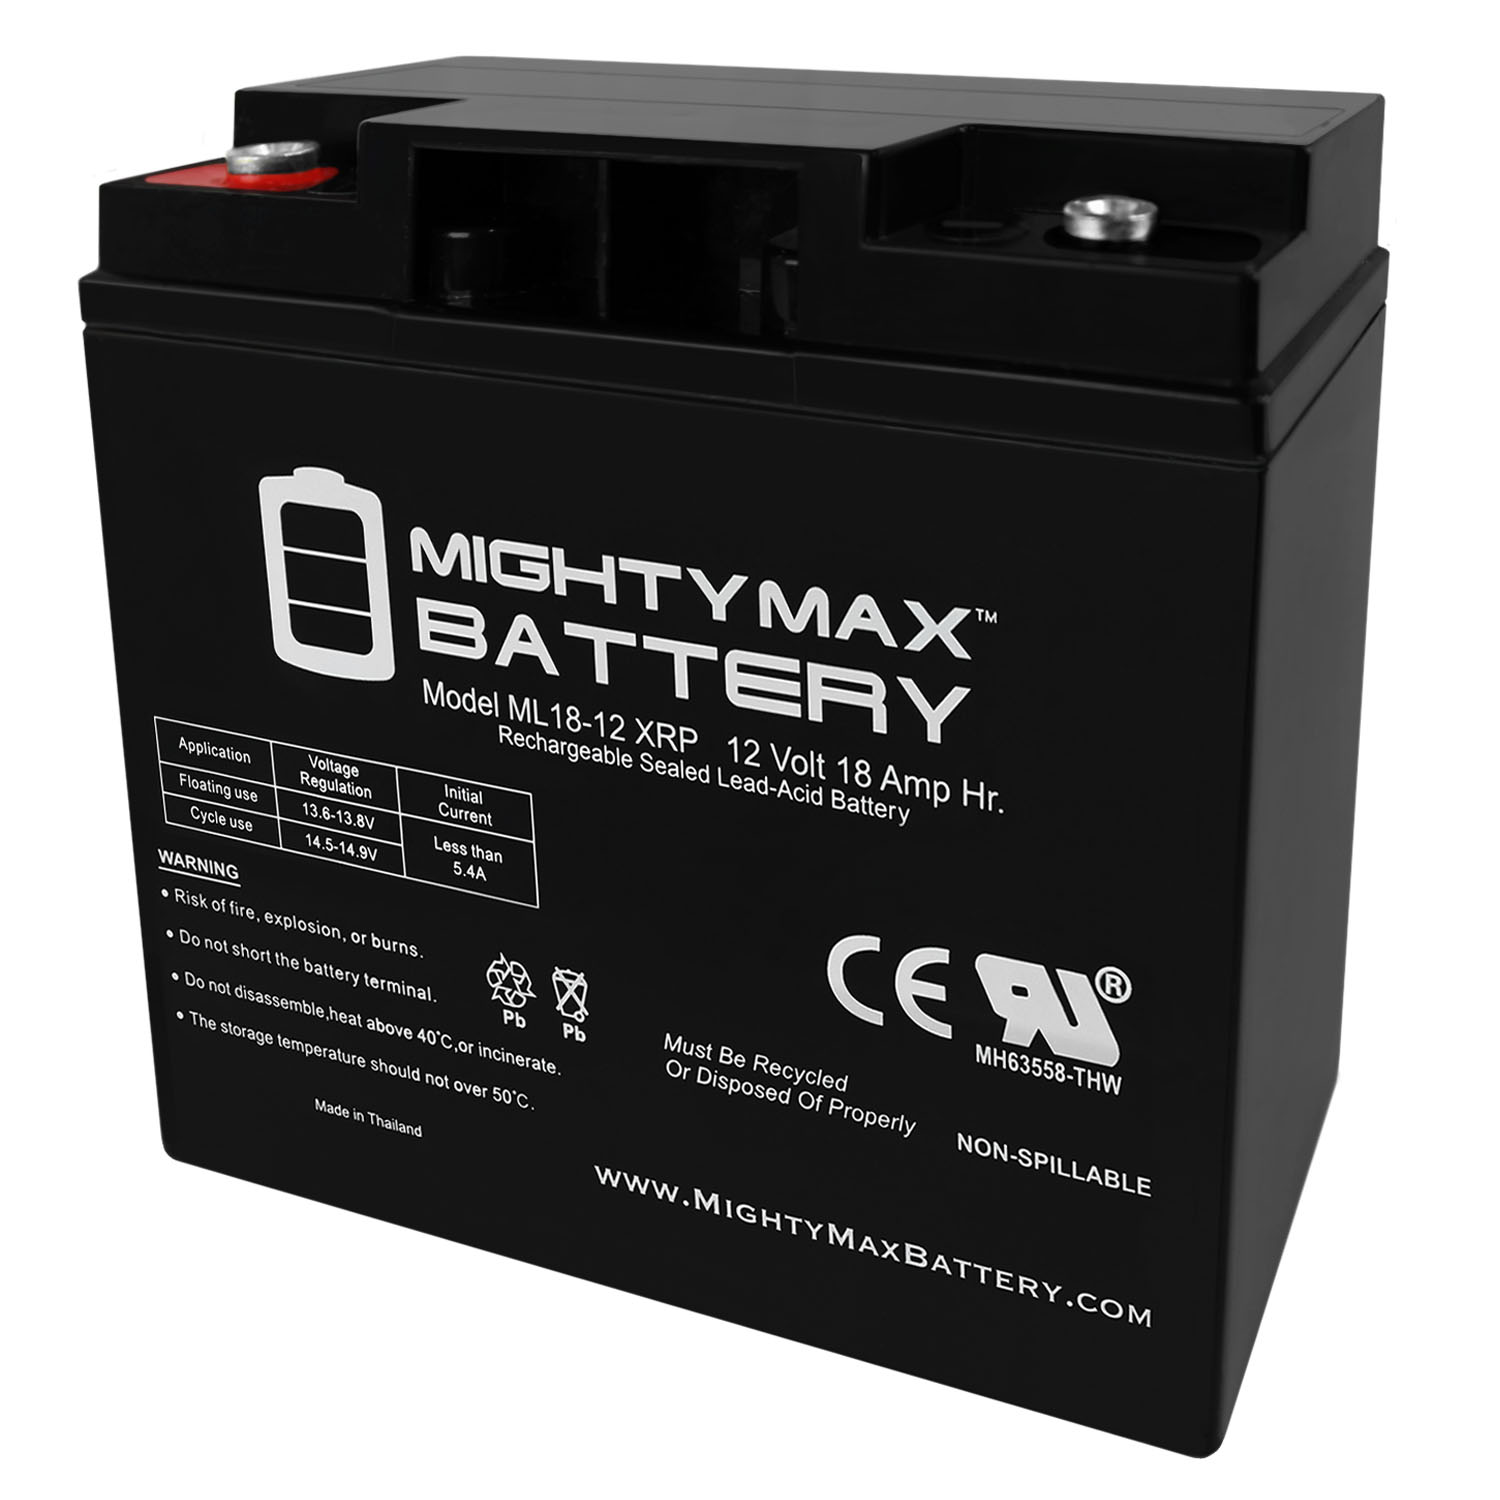 12V 18AH SLA Replacement Battery Compatible with Leoch DJW12-20, DJW 12-20